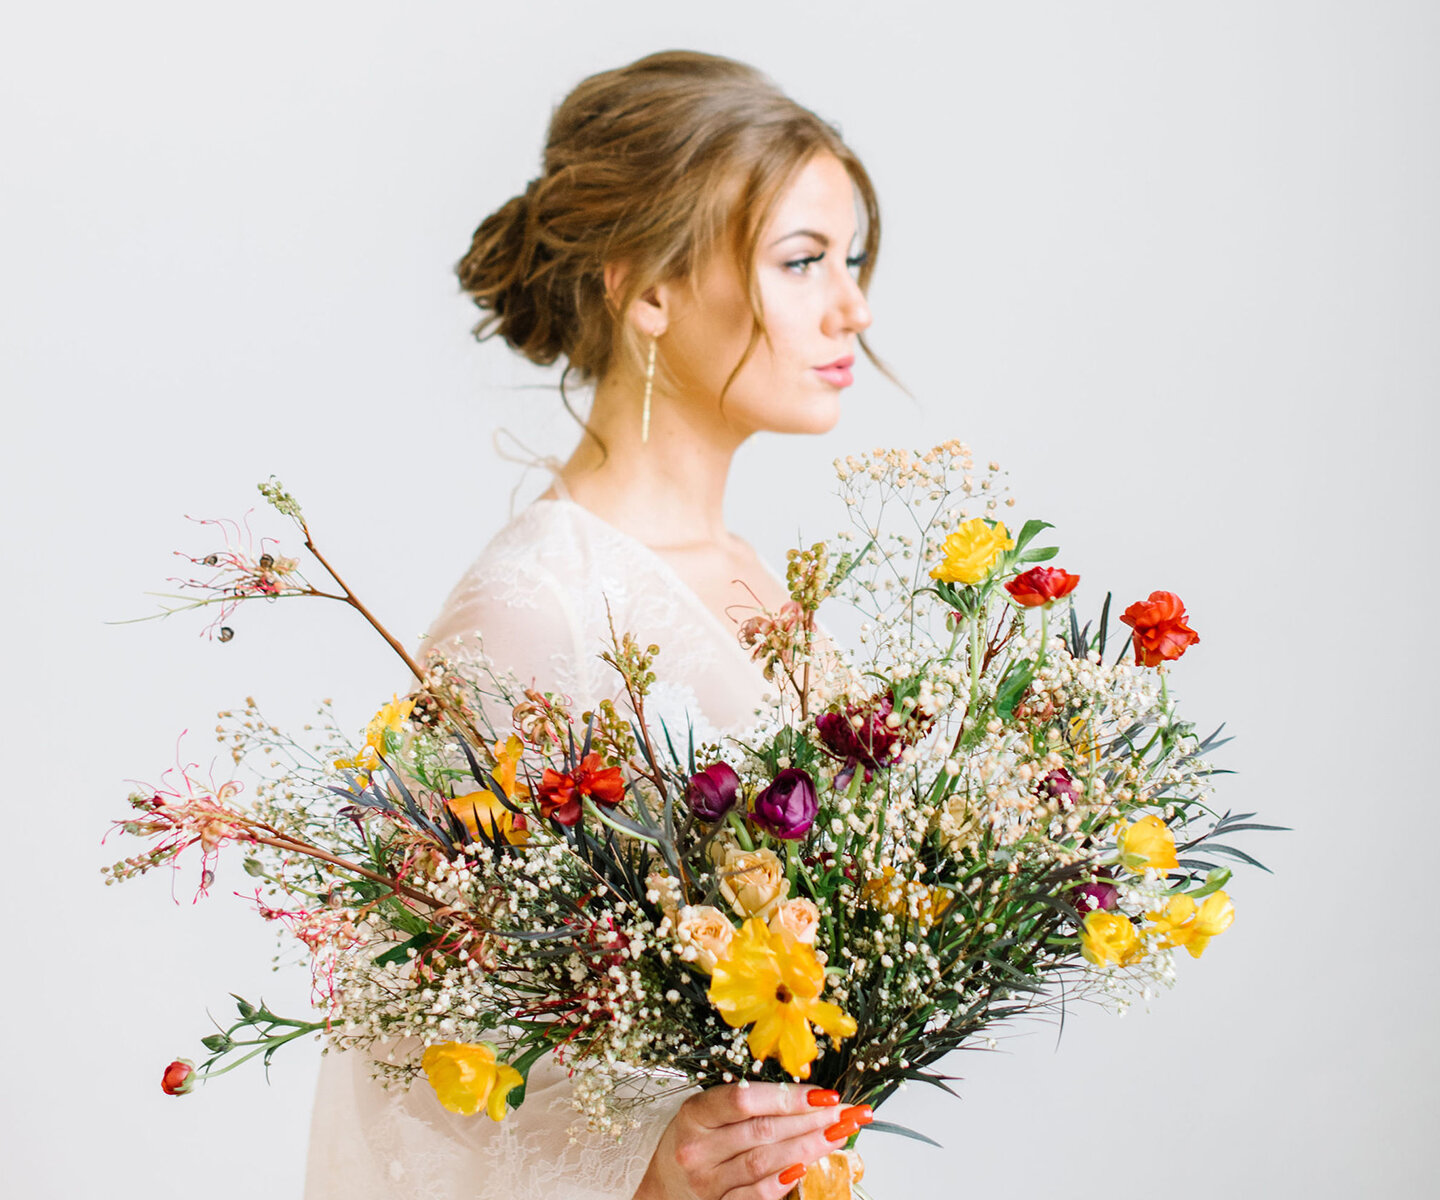 Bridal Bouquet Inspiration for Fall: 15 of the Prettiest Bouquets We've ...